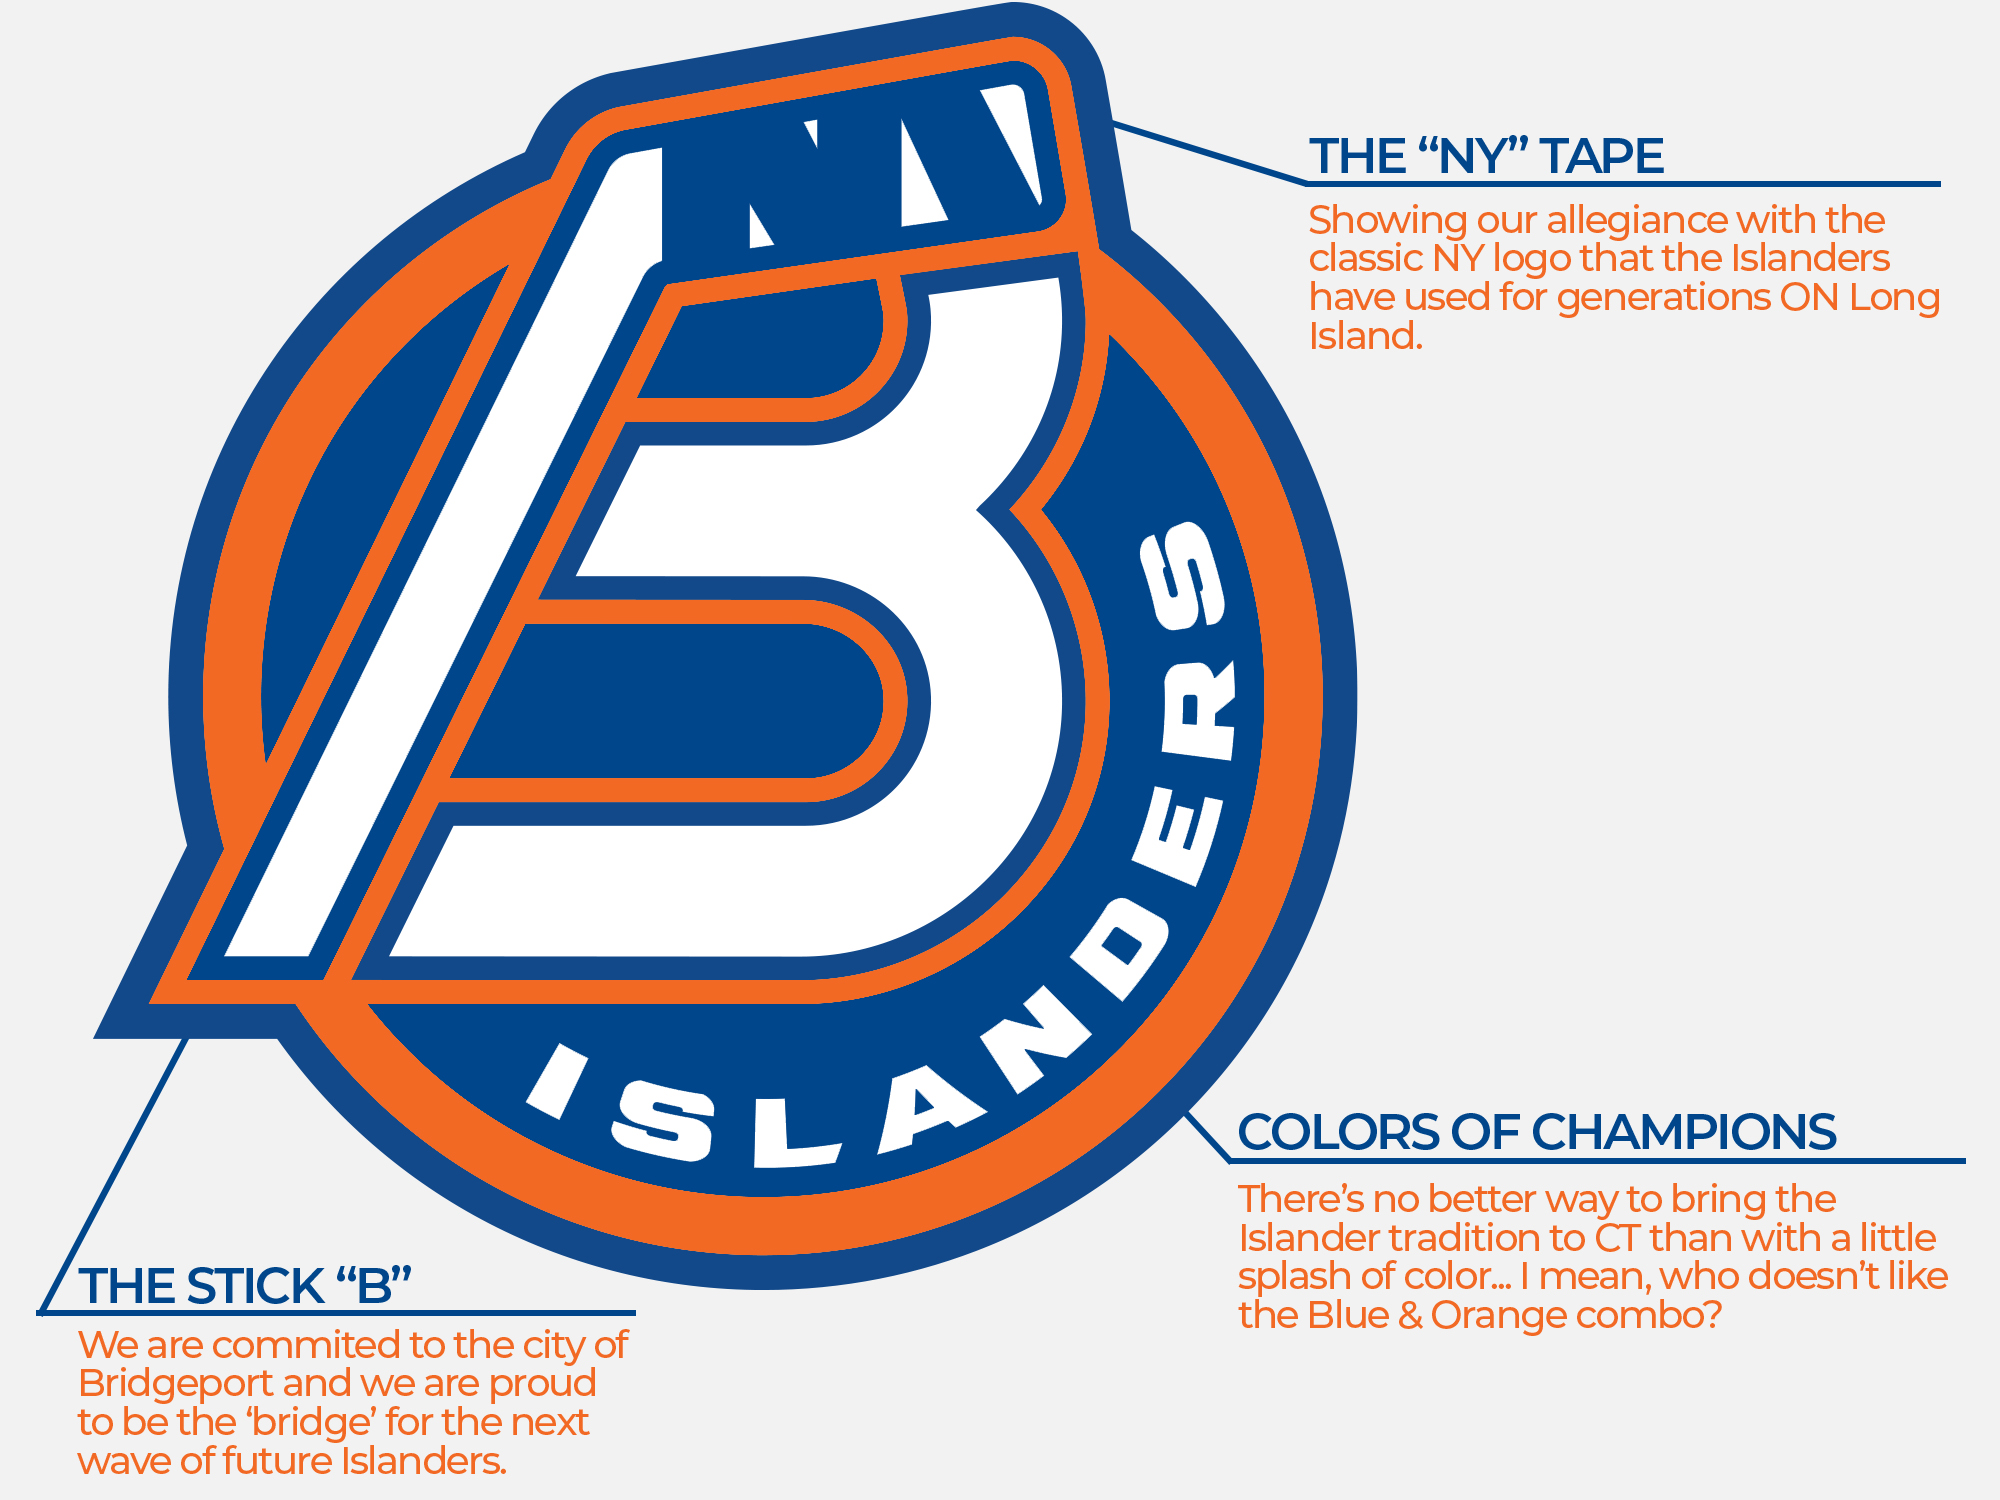 Bridgeport Sound Tigers news, photos, and more - Eyes On Isles